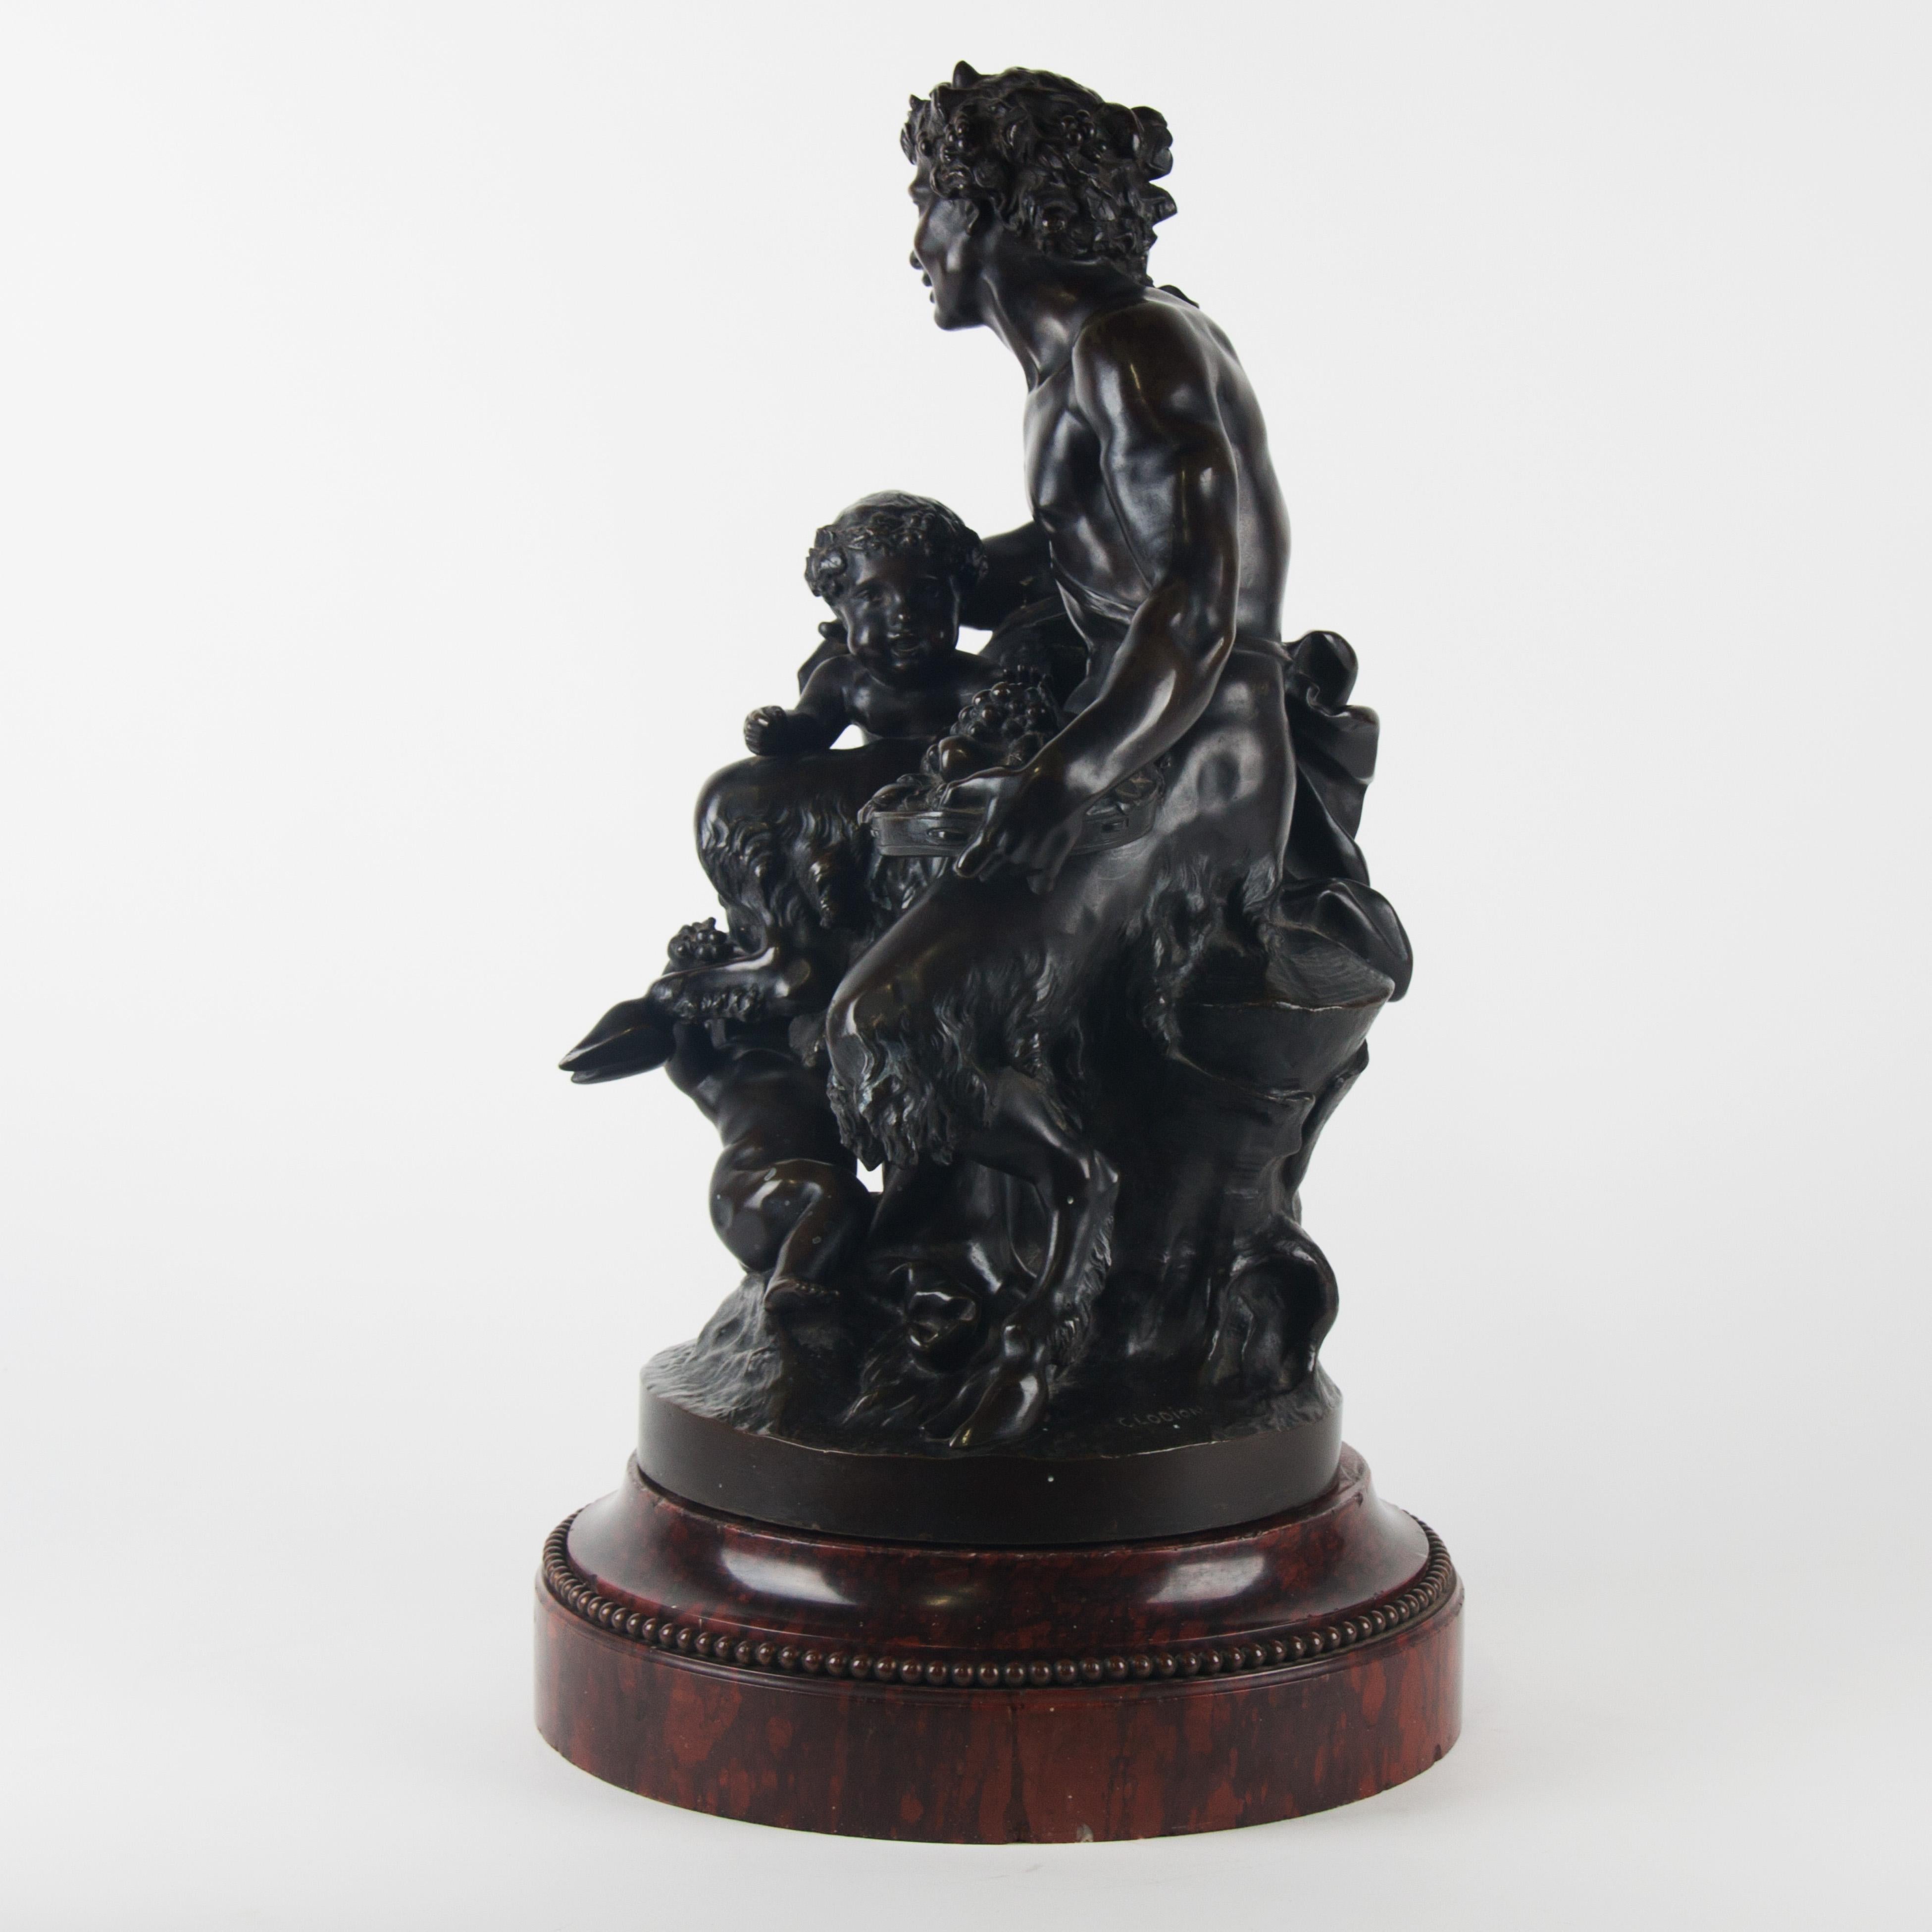 Early 19th century Bronze Group, depicting male satyr with children.
Signed by Clodion (1738-1814)